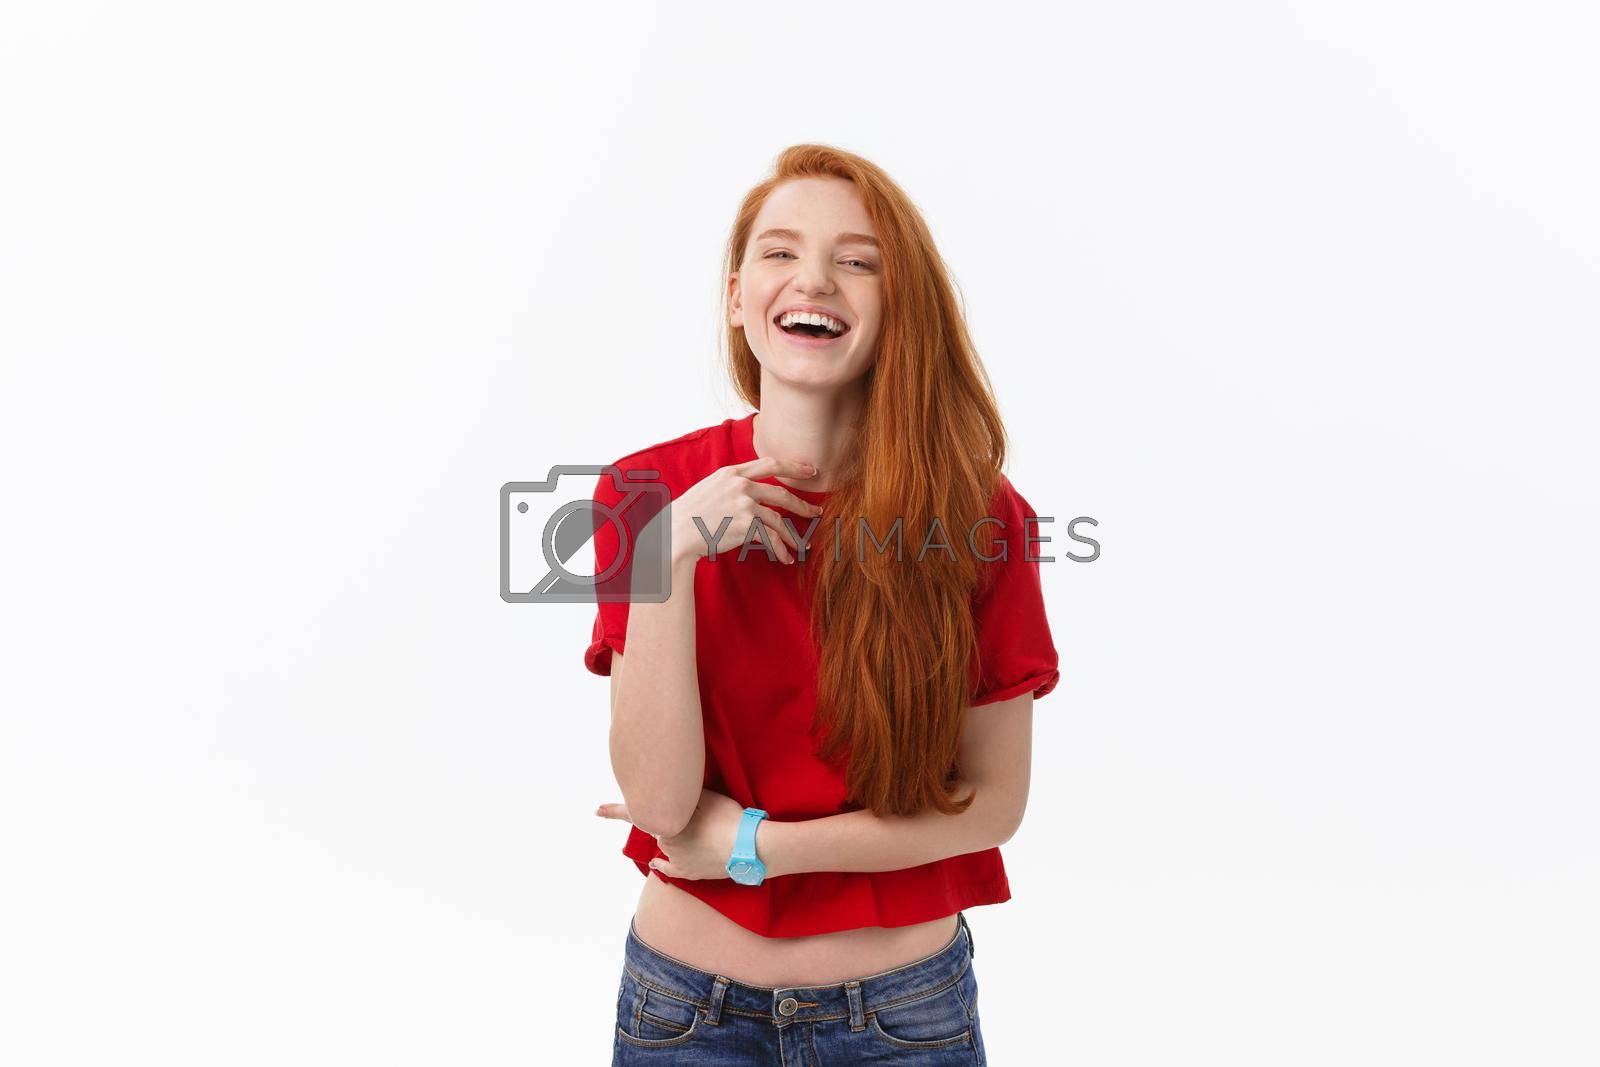 Royalty free image of Good-looking female with sincere smile rejoicing her success having good mood showing her positive emotions. Woman with gentle smile. by Benzoix